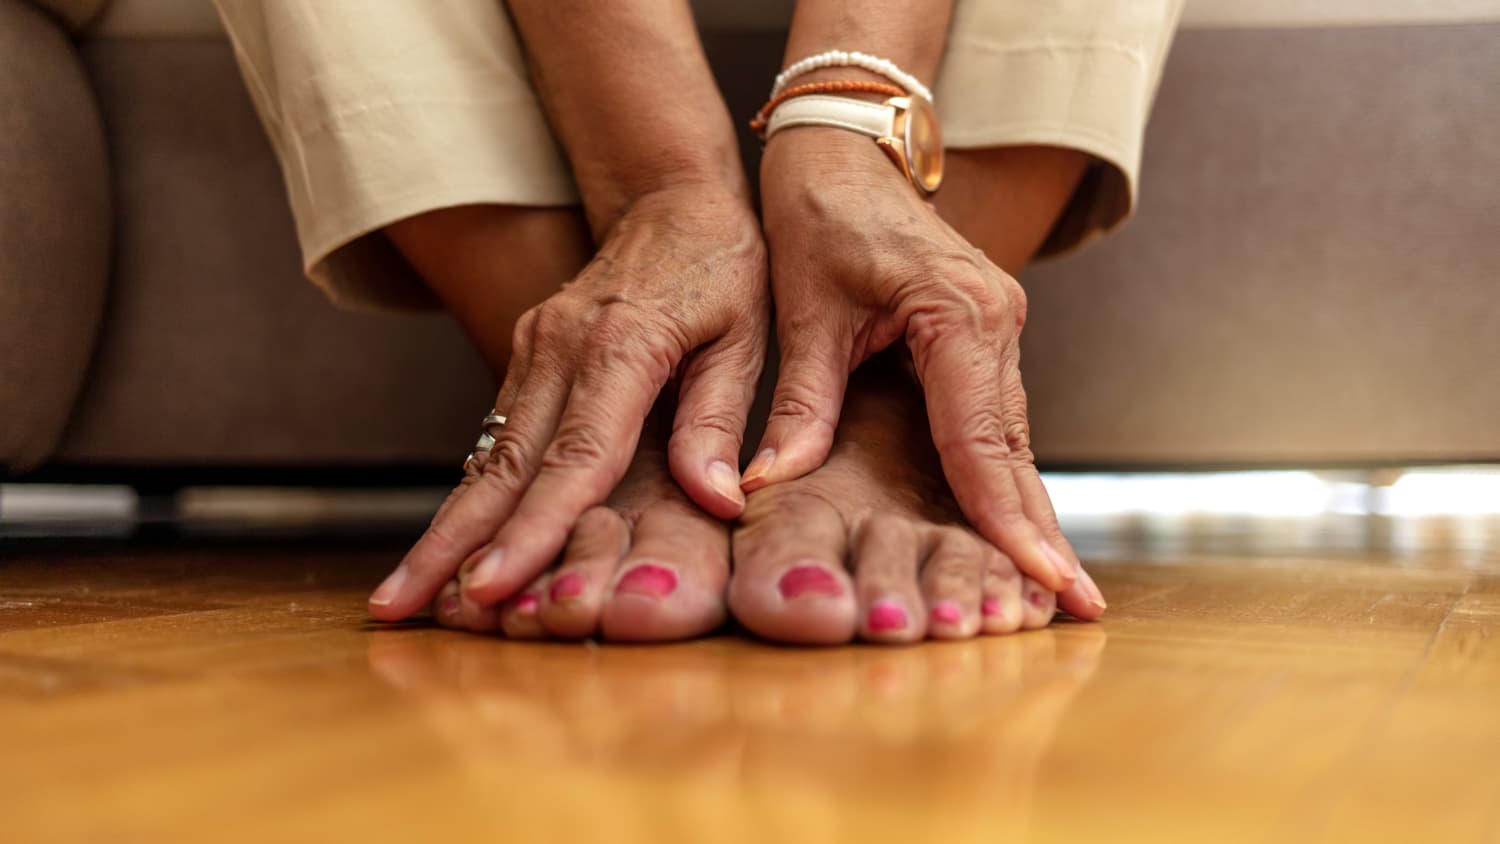 An older woman massages her feet to relieve the pain caused by arthritis